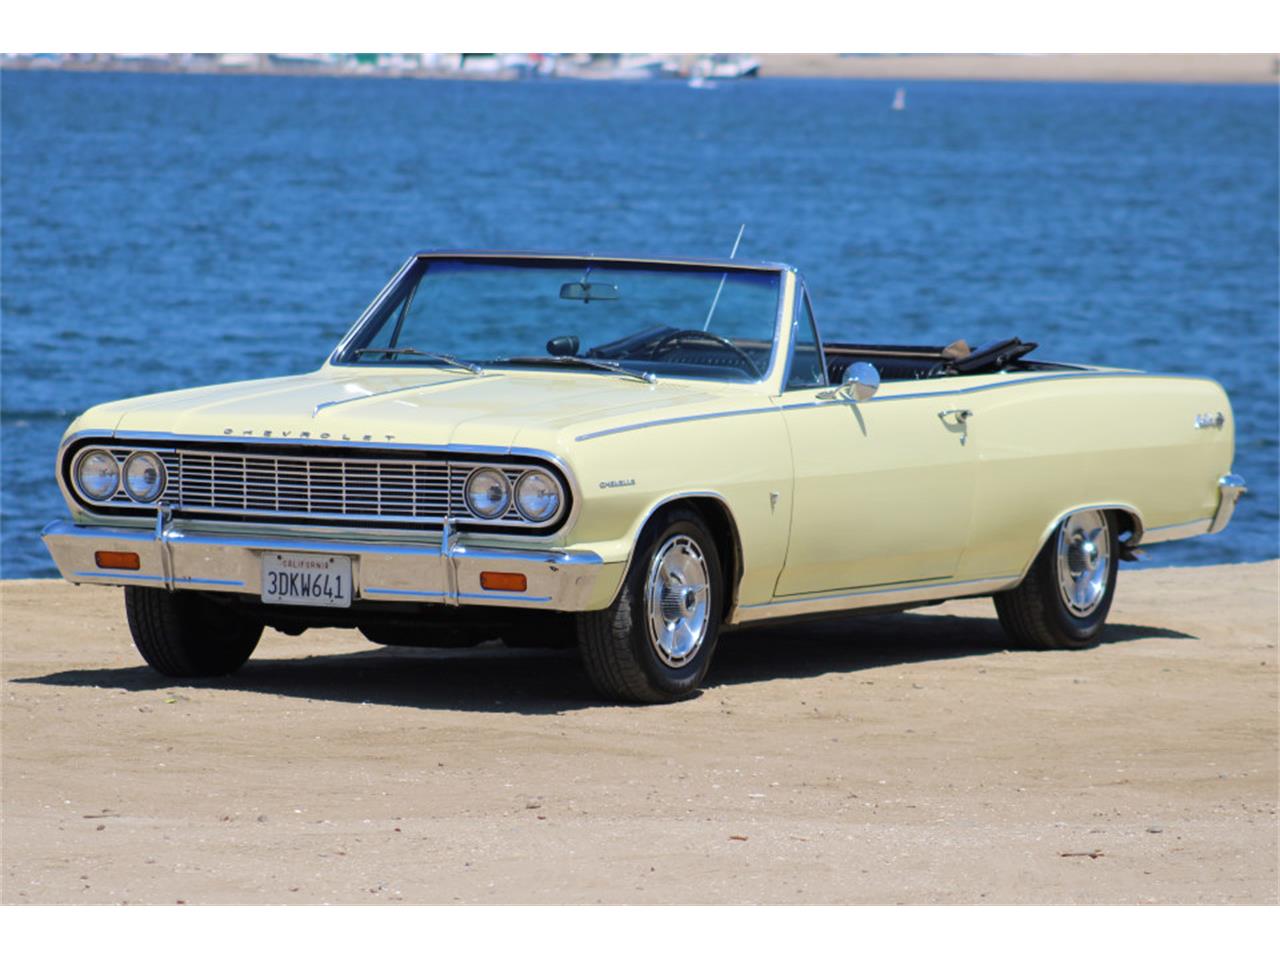 For Sale: 1964 Chevrolet Chevelle Malibu SS in SAN DIEGO, California for sale in San Diego, CA